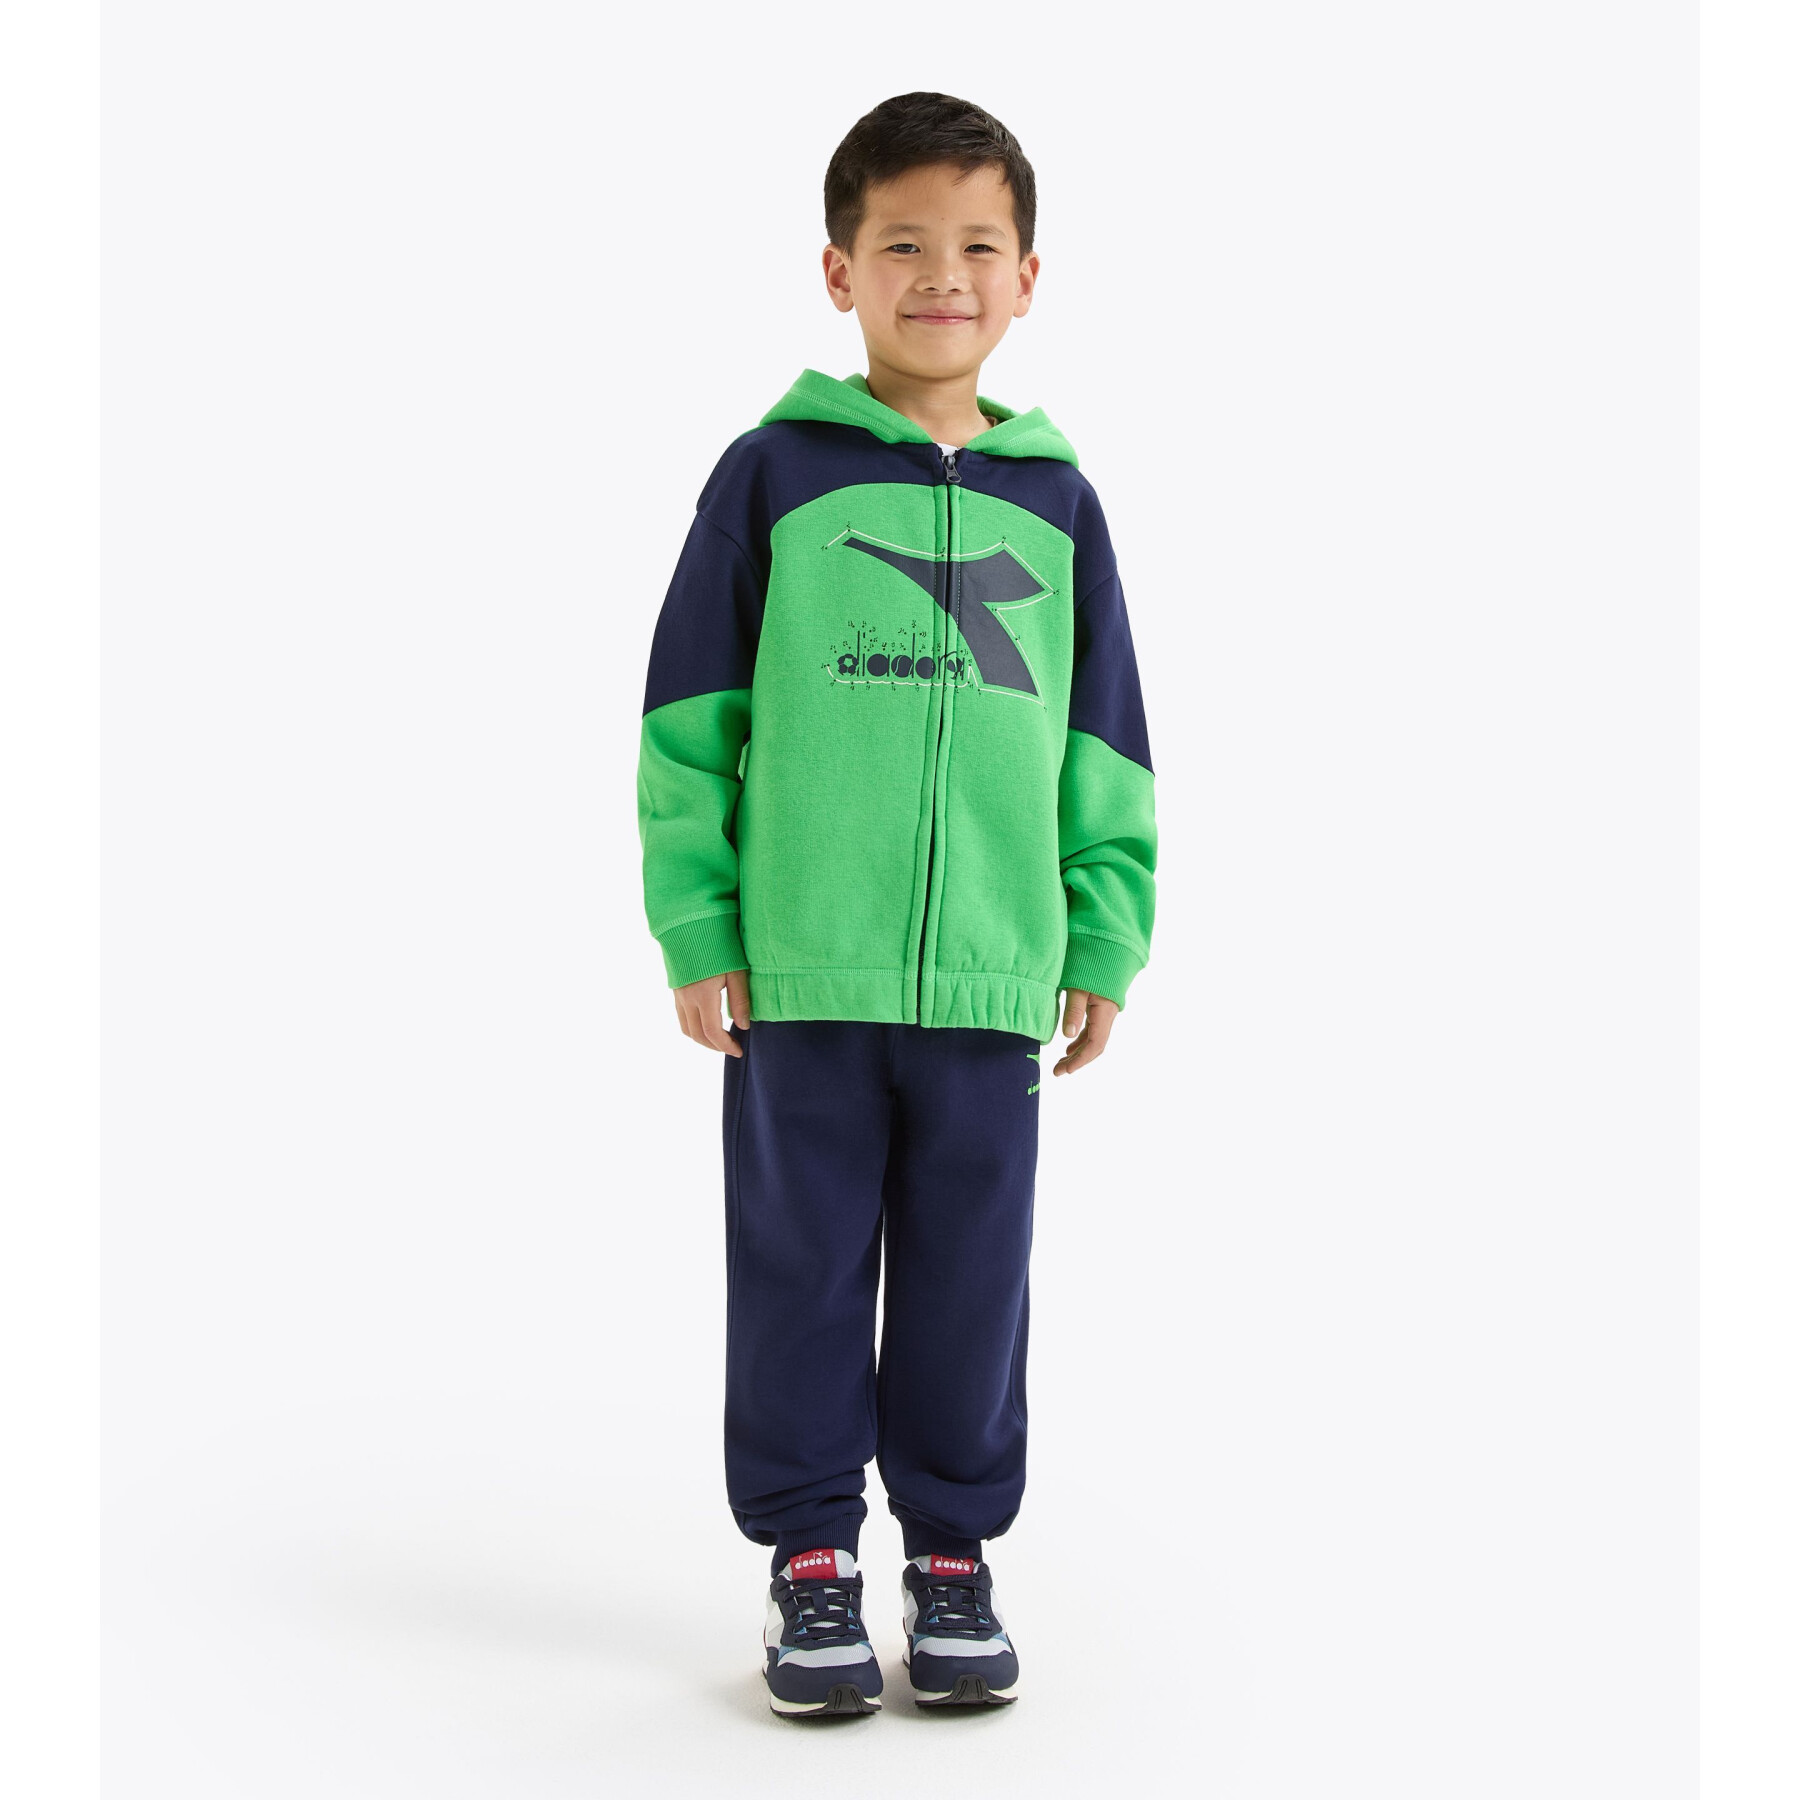 Children's zip-up hooded tracksuit Diadora Riddle